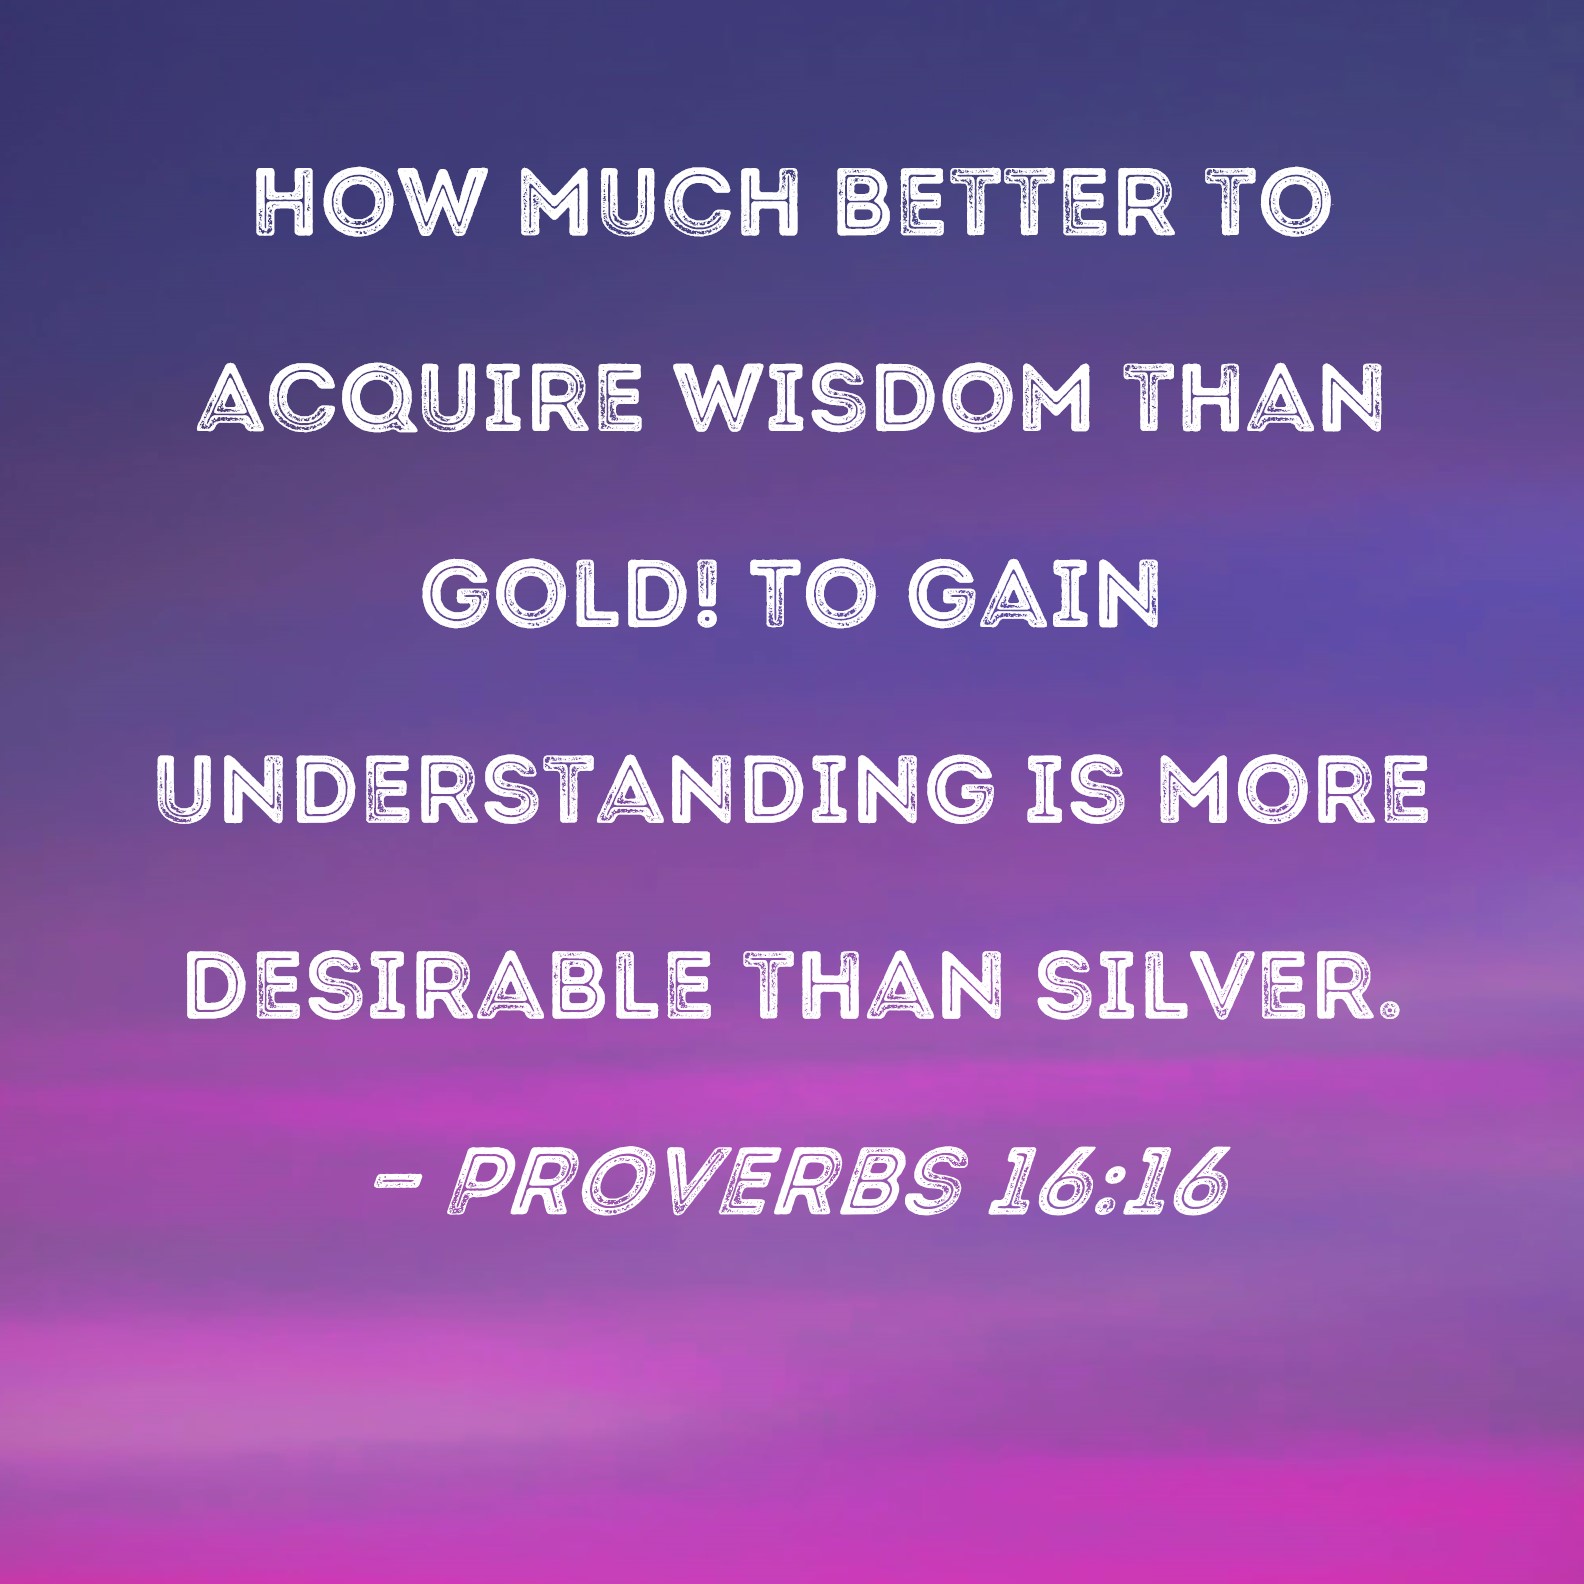 Bible Society - How much better to get wisdom than gold, to get insight  rather than silver! 𝗣𝗿𝗼𝘃𝗲𝗿𝗯𝘀 𝟭𝟲.𝟭𝟲 (𝗘𝗦𝗩)